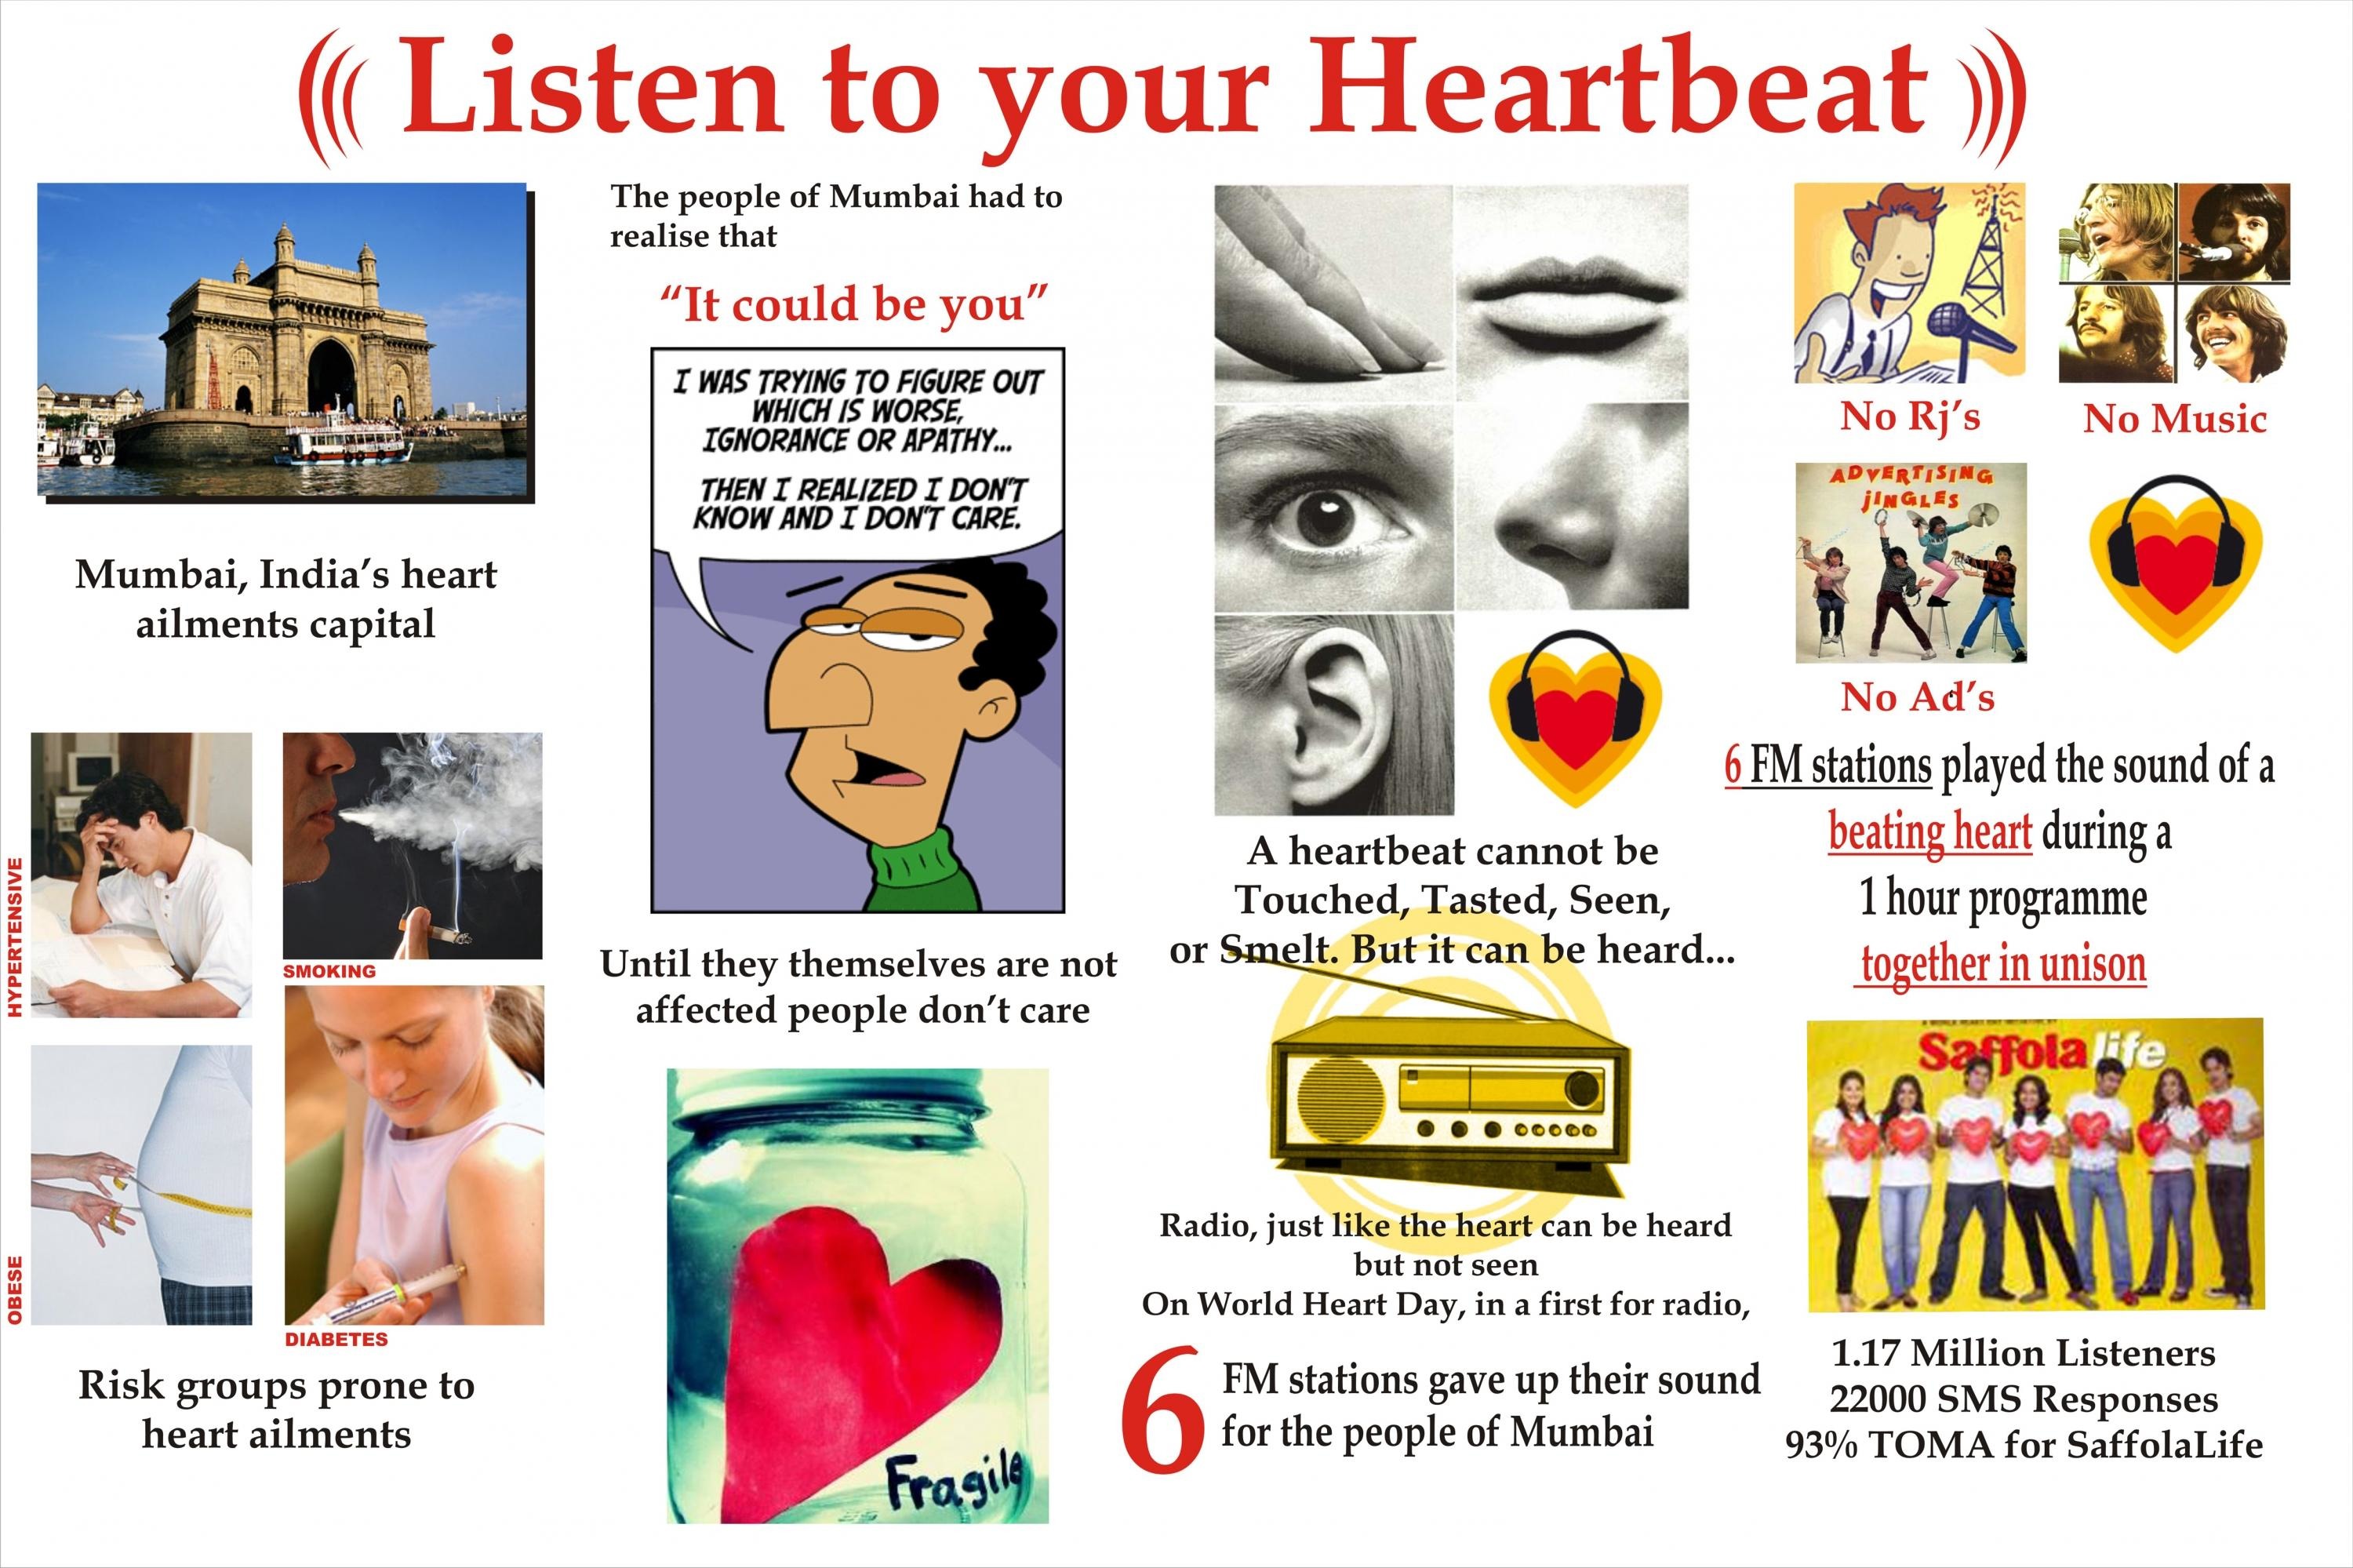 LISTEN TO YOUR HEARTBEAT